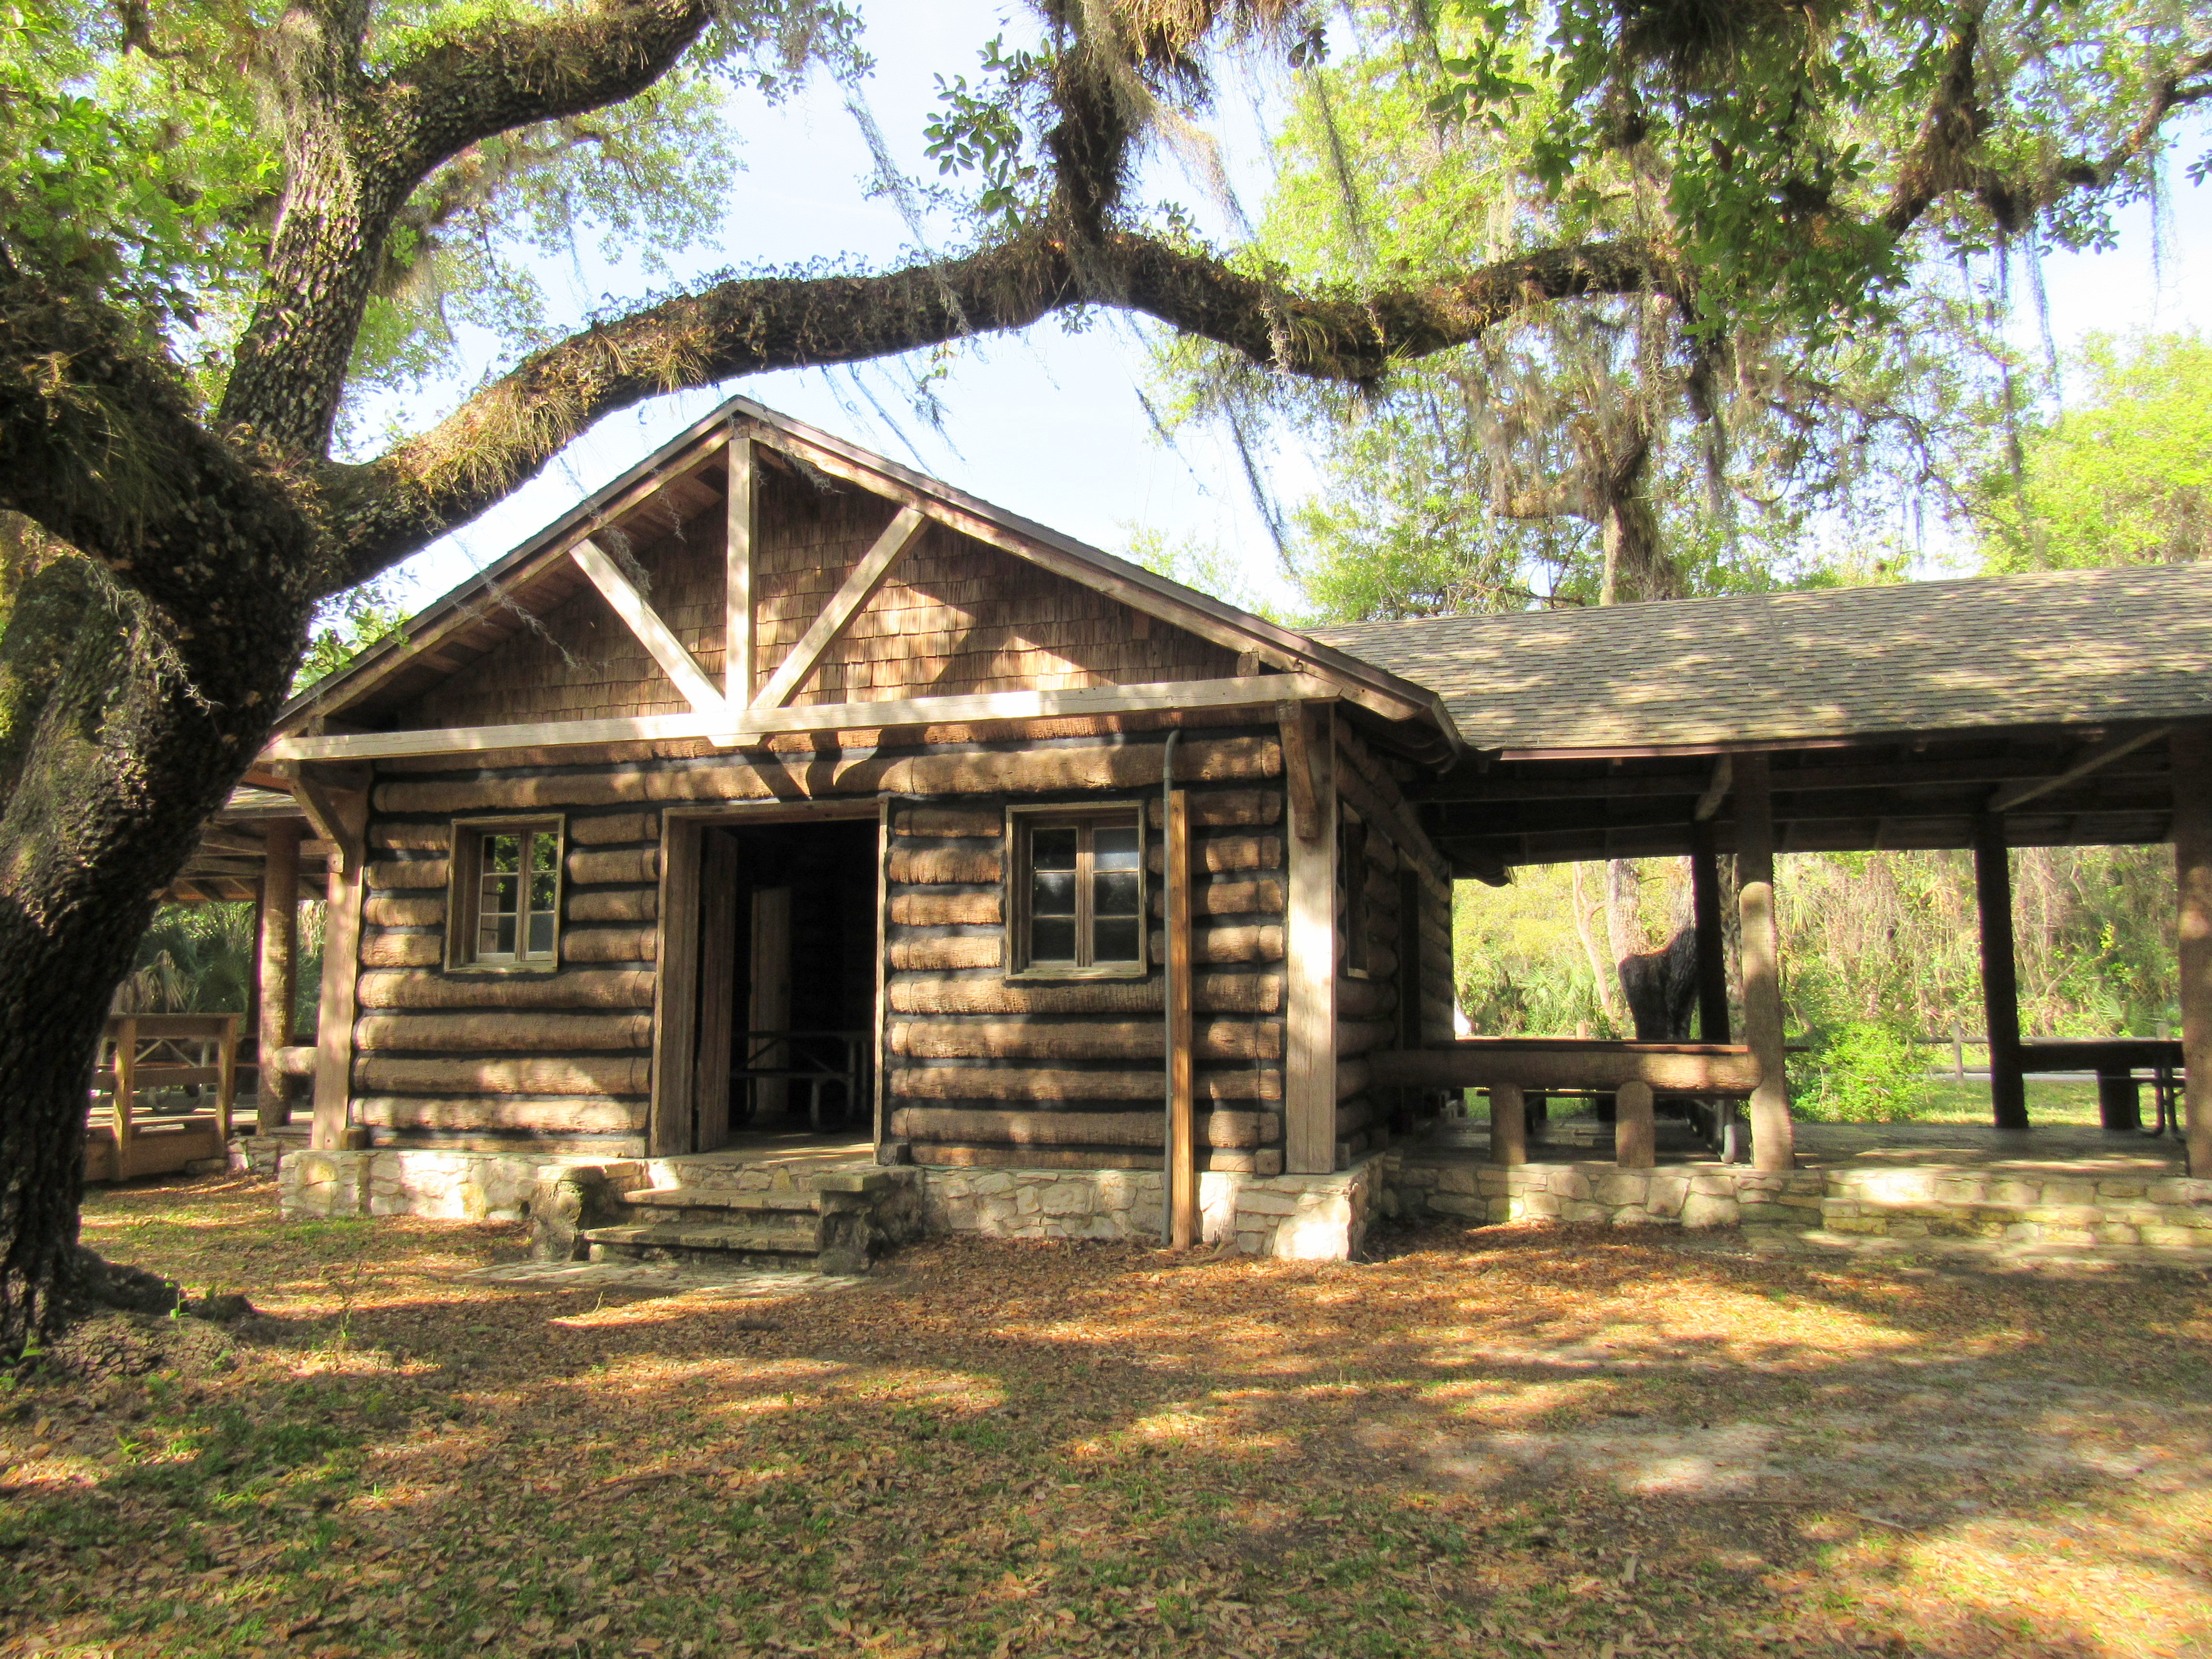 The Log Pavilion in the shade of a Live Oak